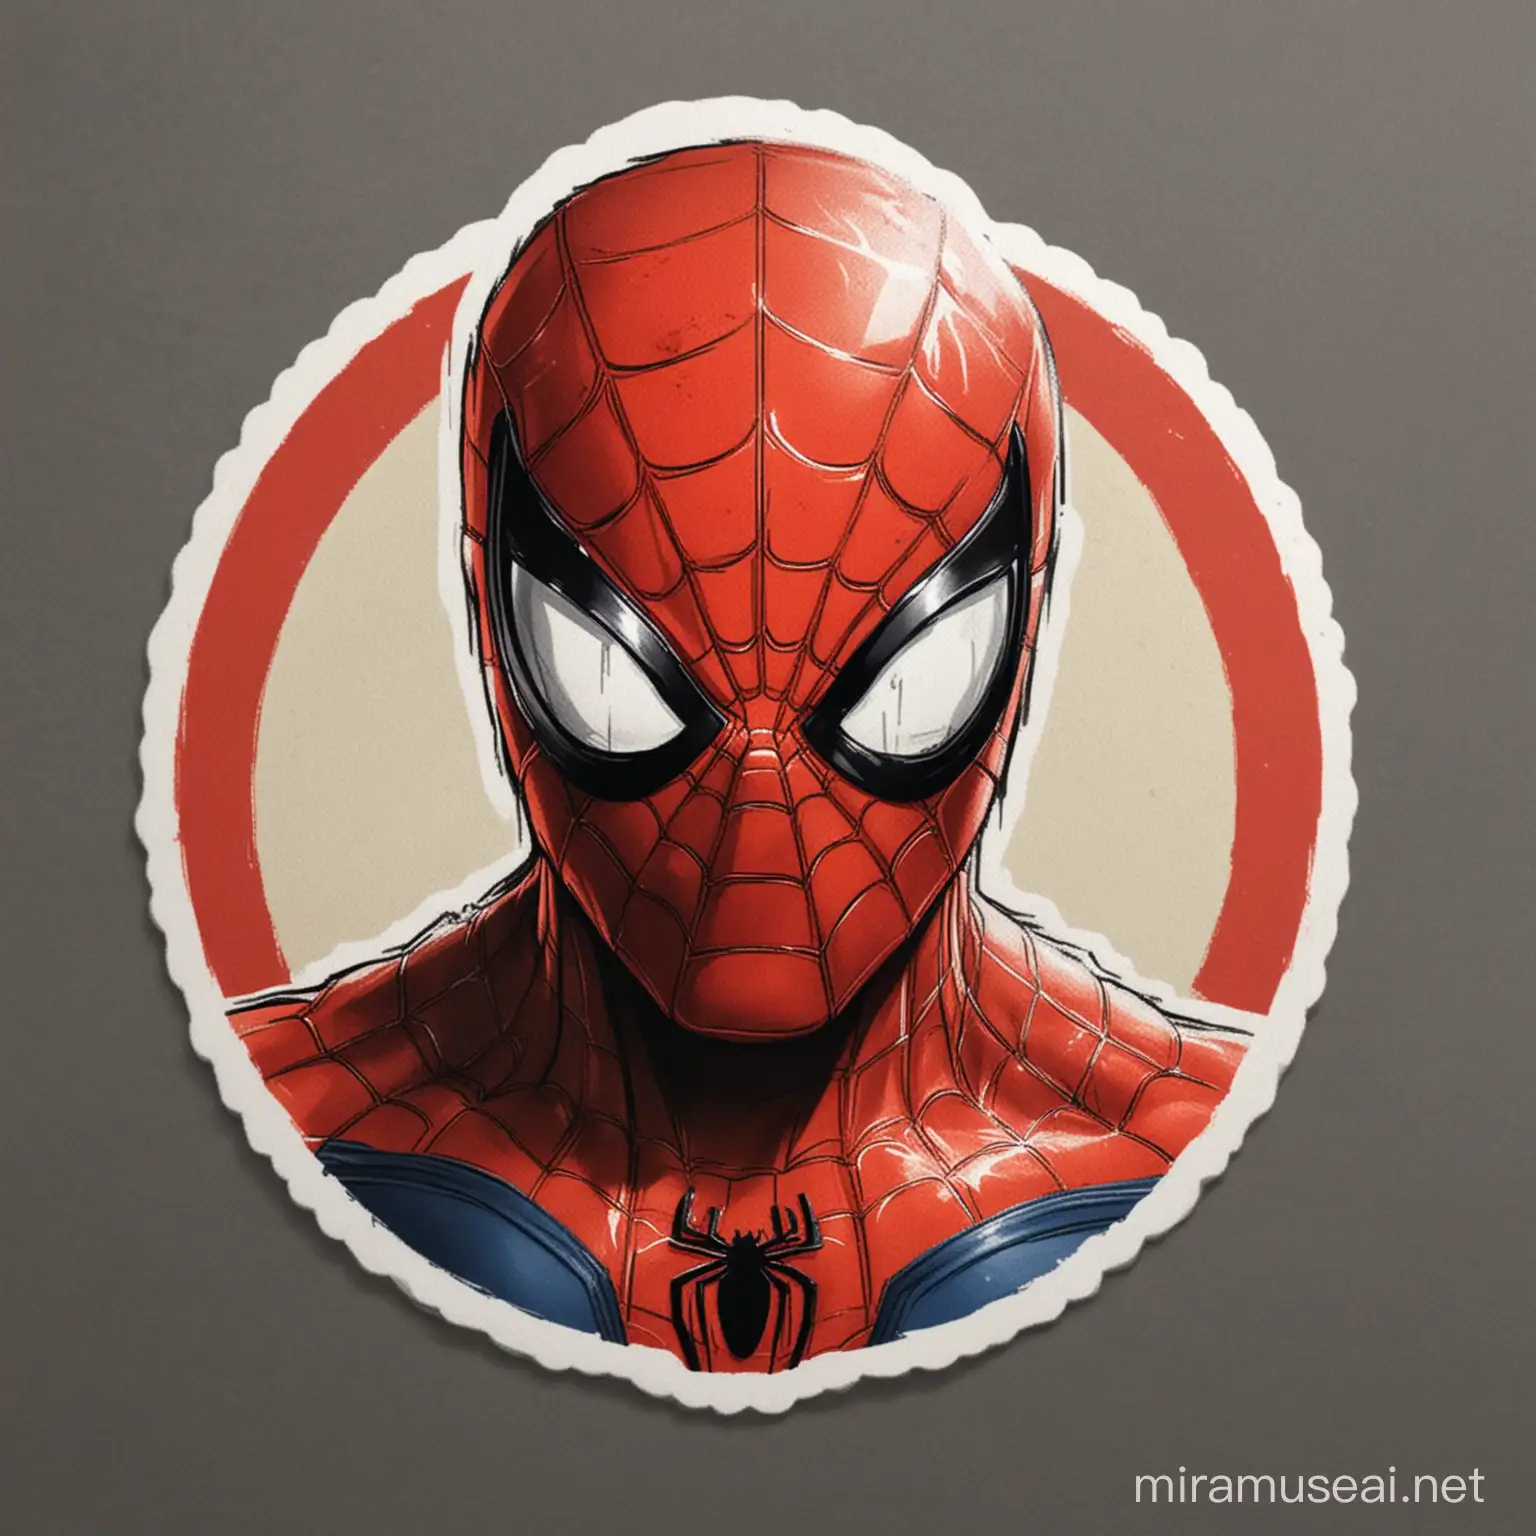 generate a sticker type image of spiderman